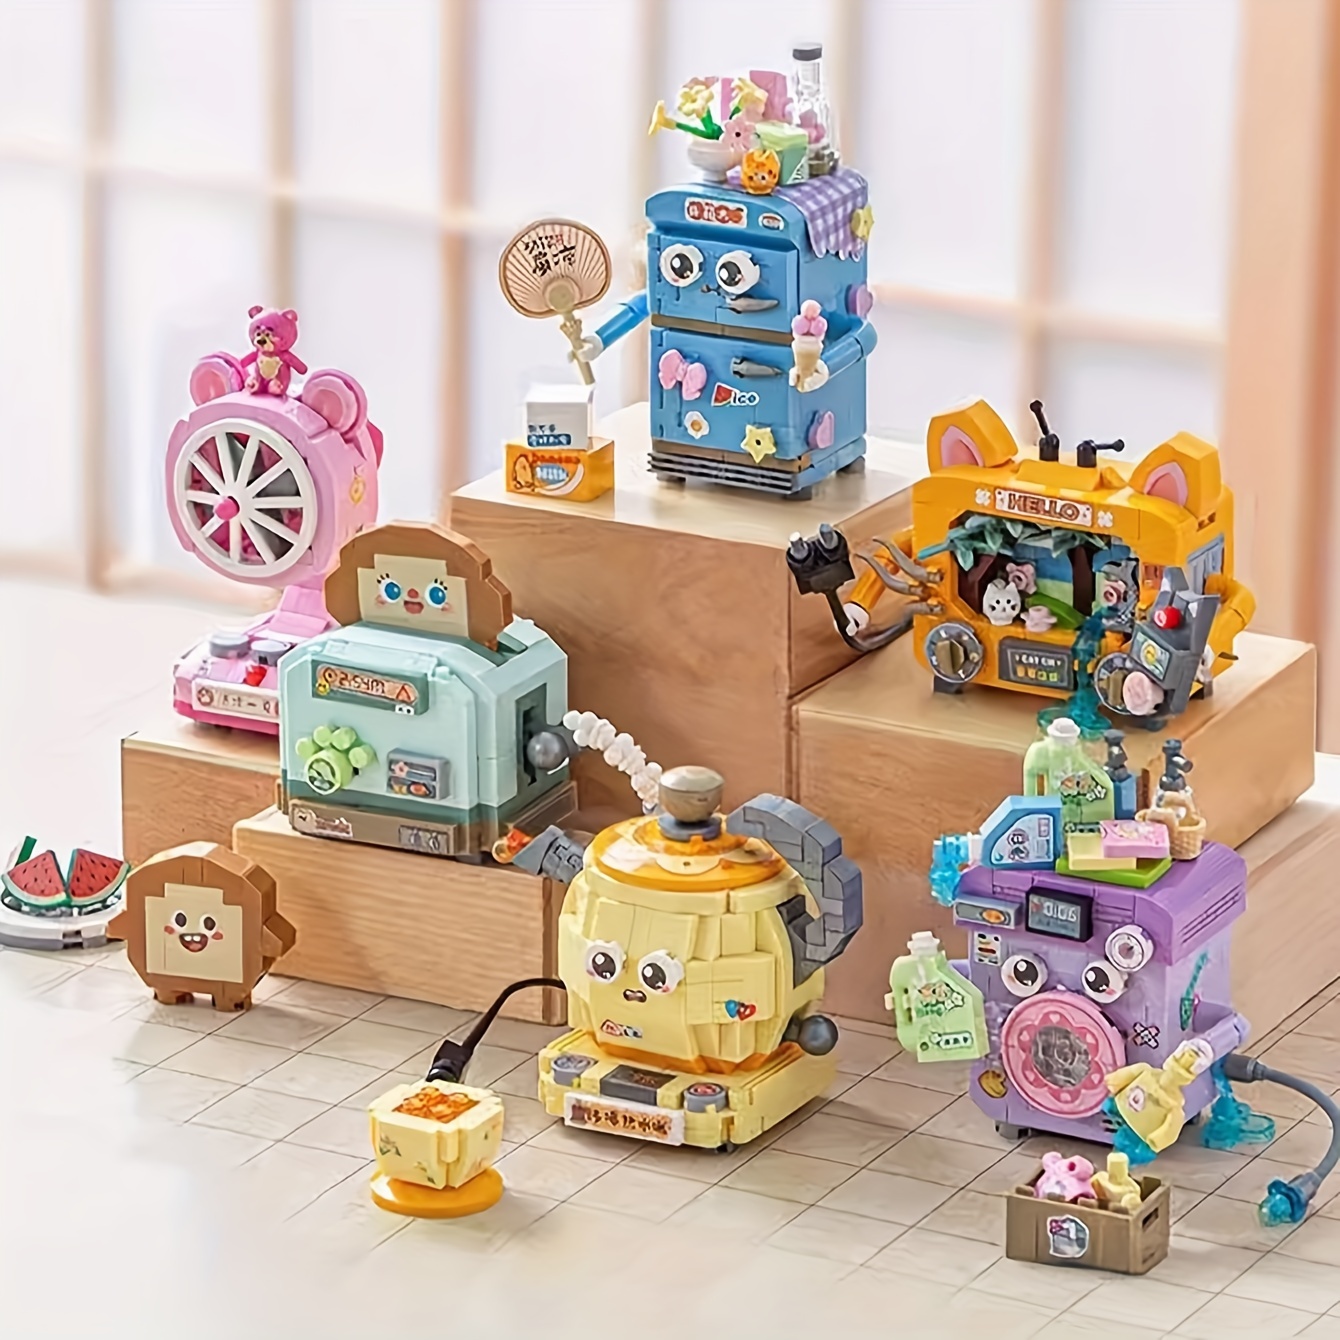 

Kawaii Cute Home Appliances Tv Washing Machine Refrigerator Oven Kettle Mini Building Blocks Set, Birthday Gift, Table Decoration, To Improve Hands-on Ability